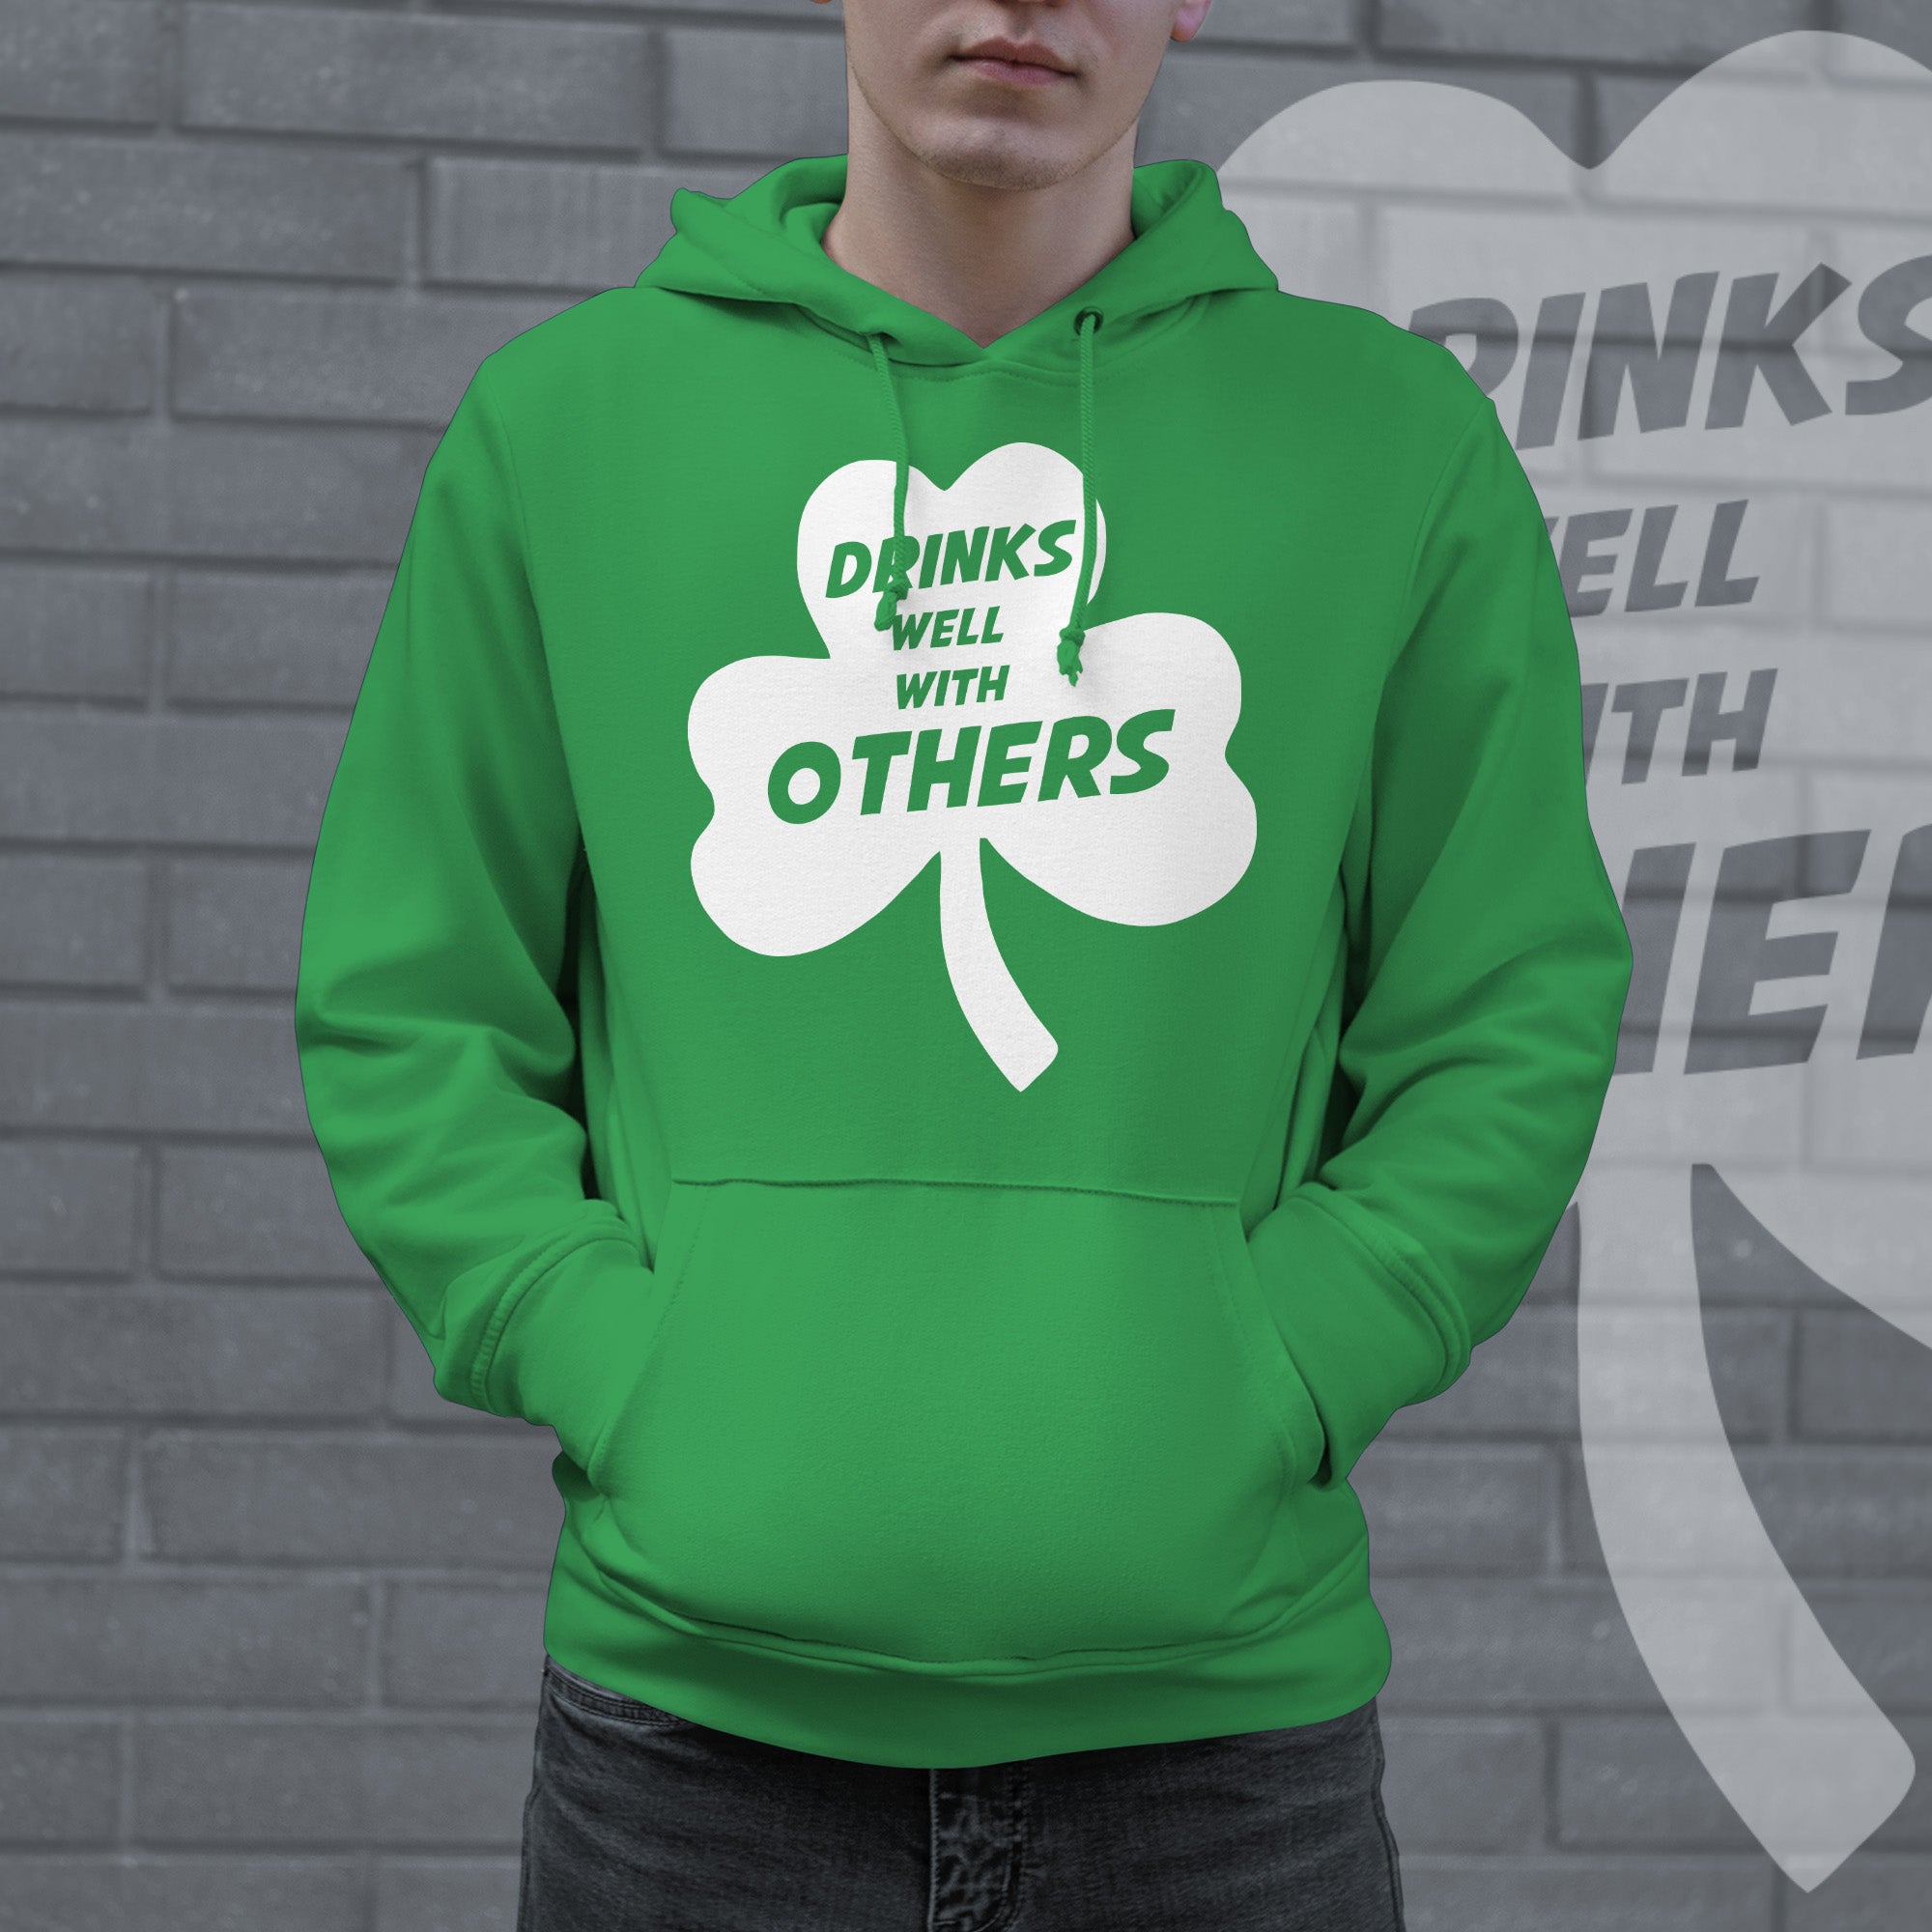 Funny Green - Drinks Well Drinks Well With Others Hoodie Nerdy Saint Patrick's Day Drinking Tee